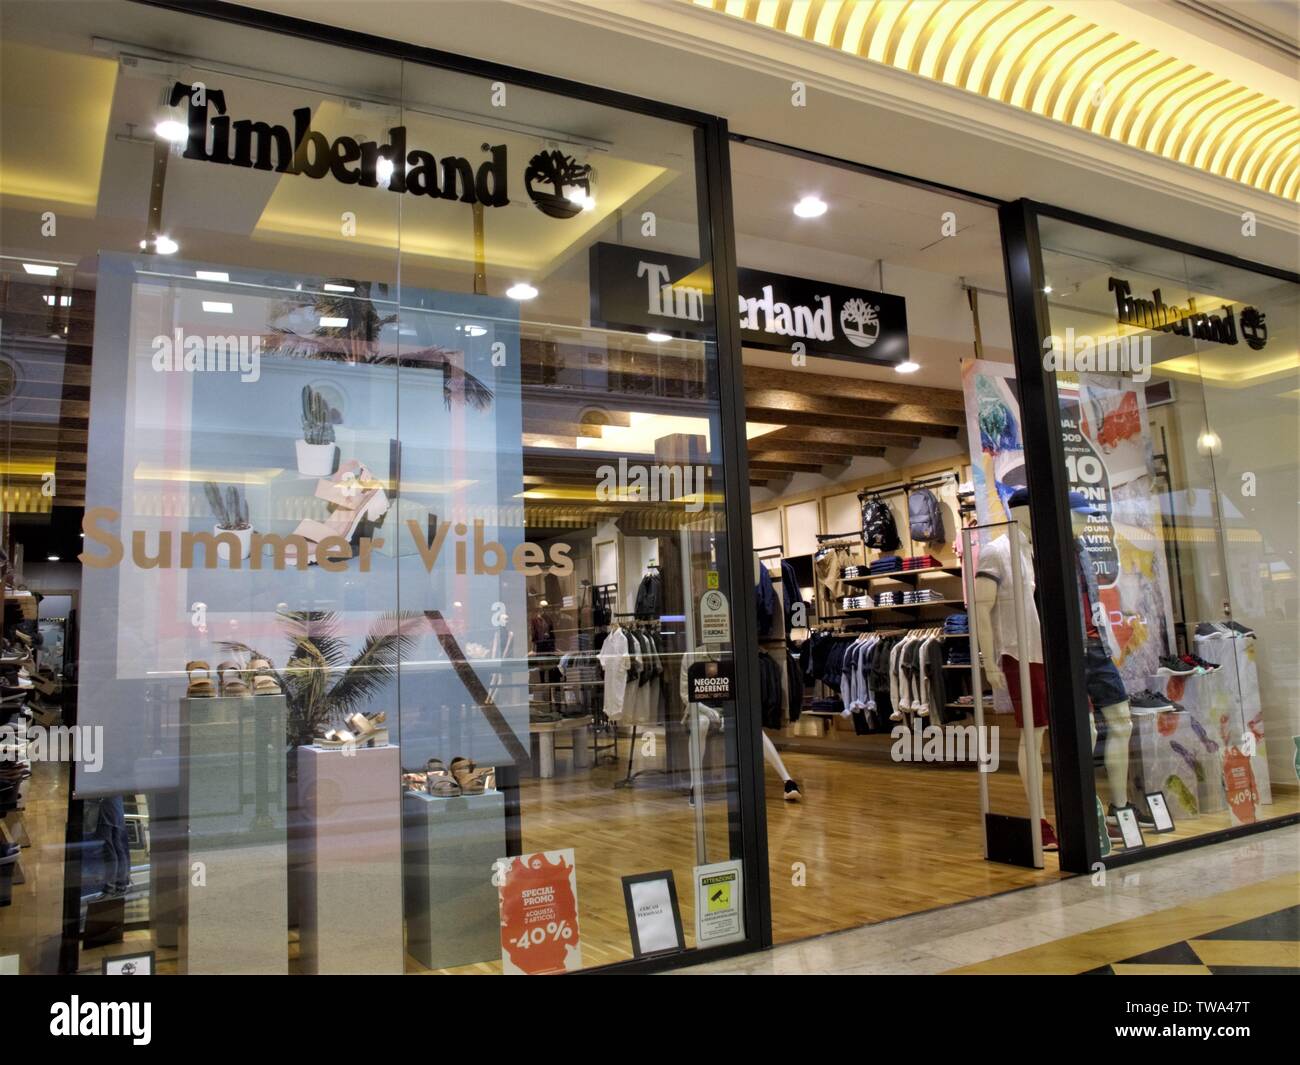 Timberland Shoes High Resolution Stock Photography and Images - Alamy